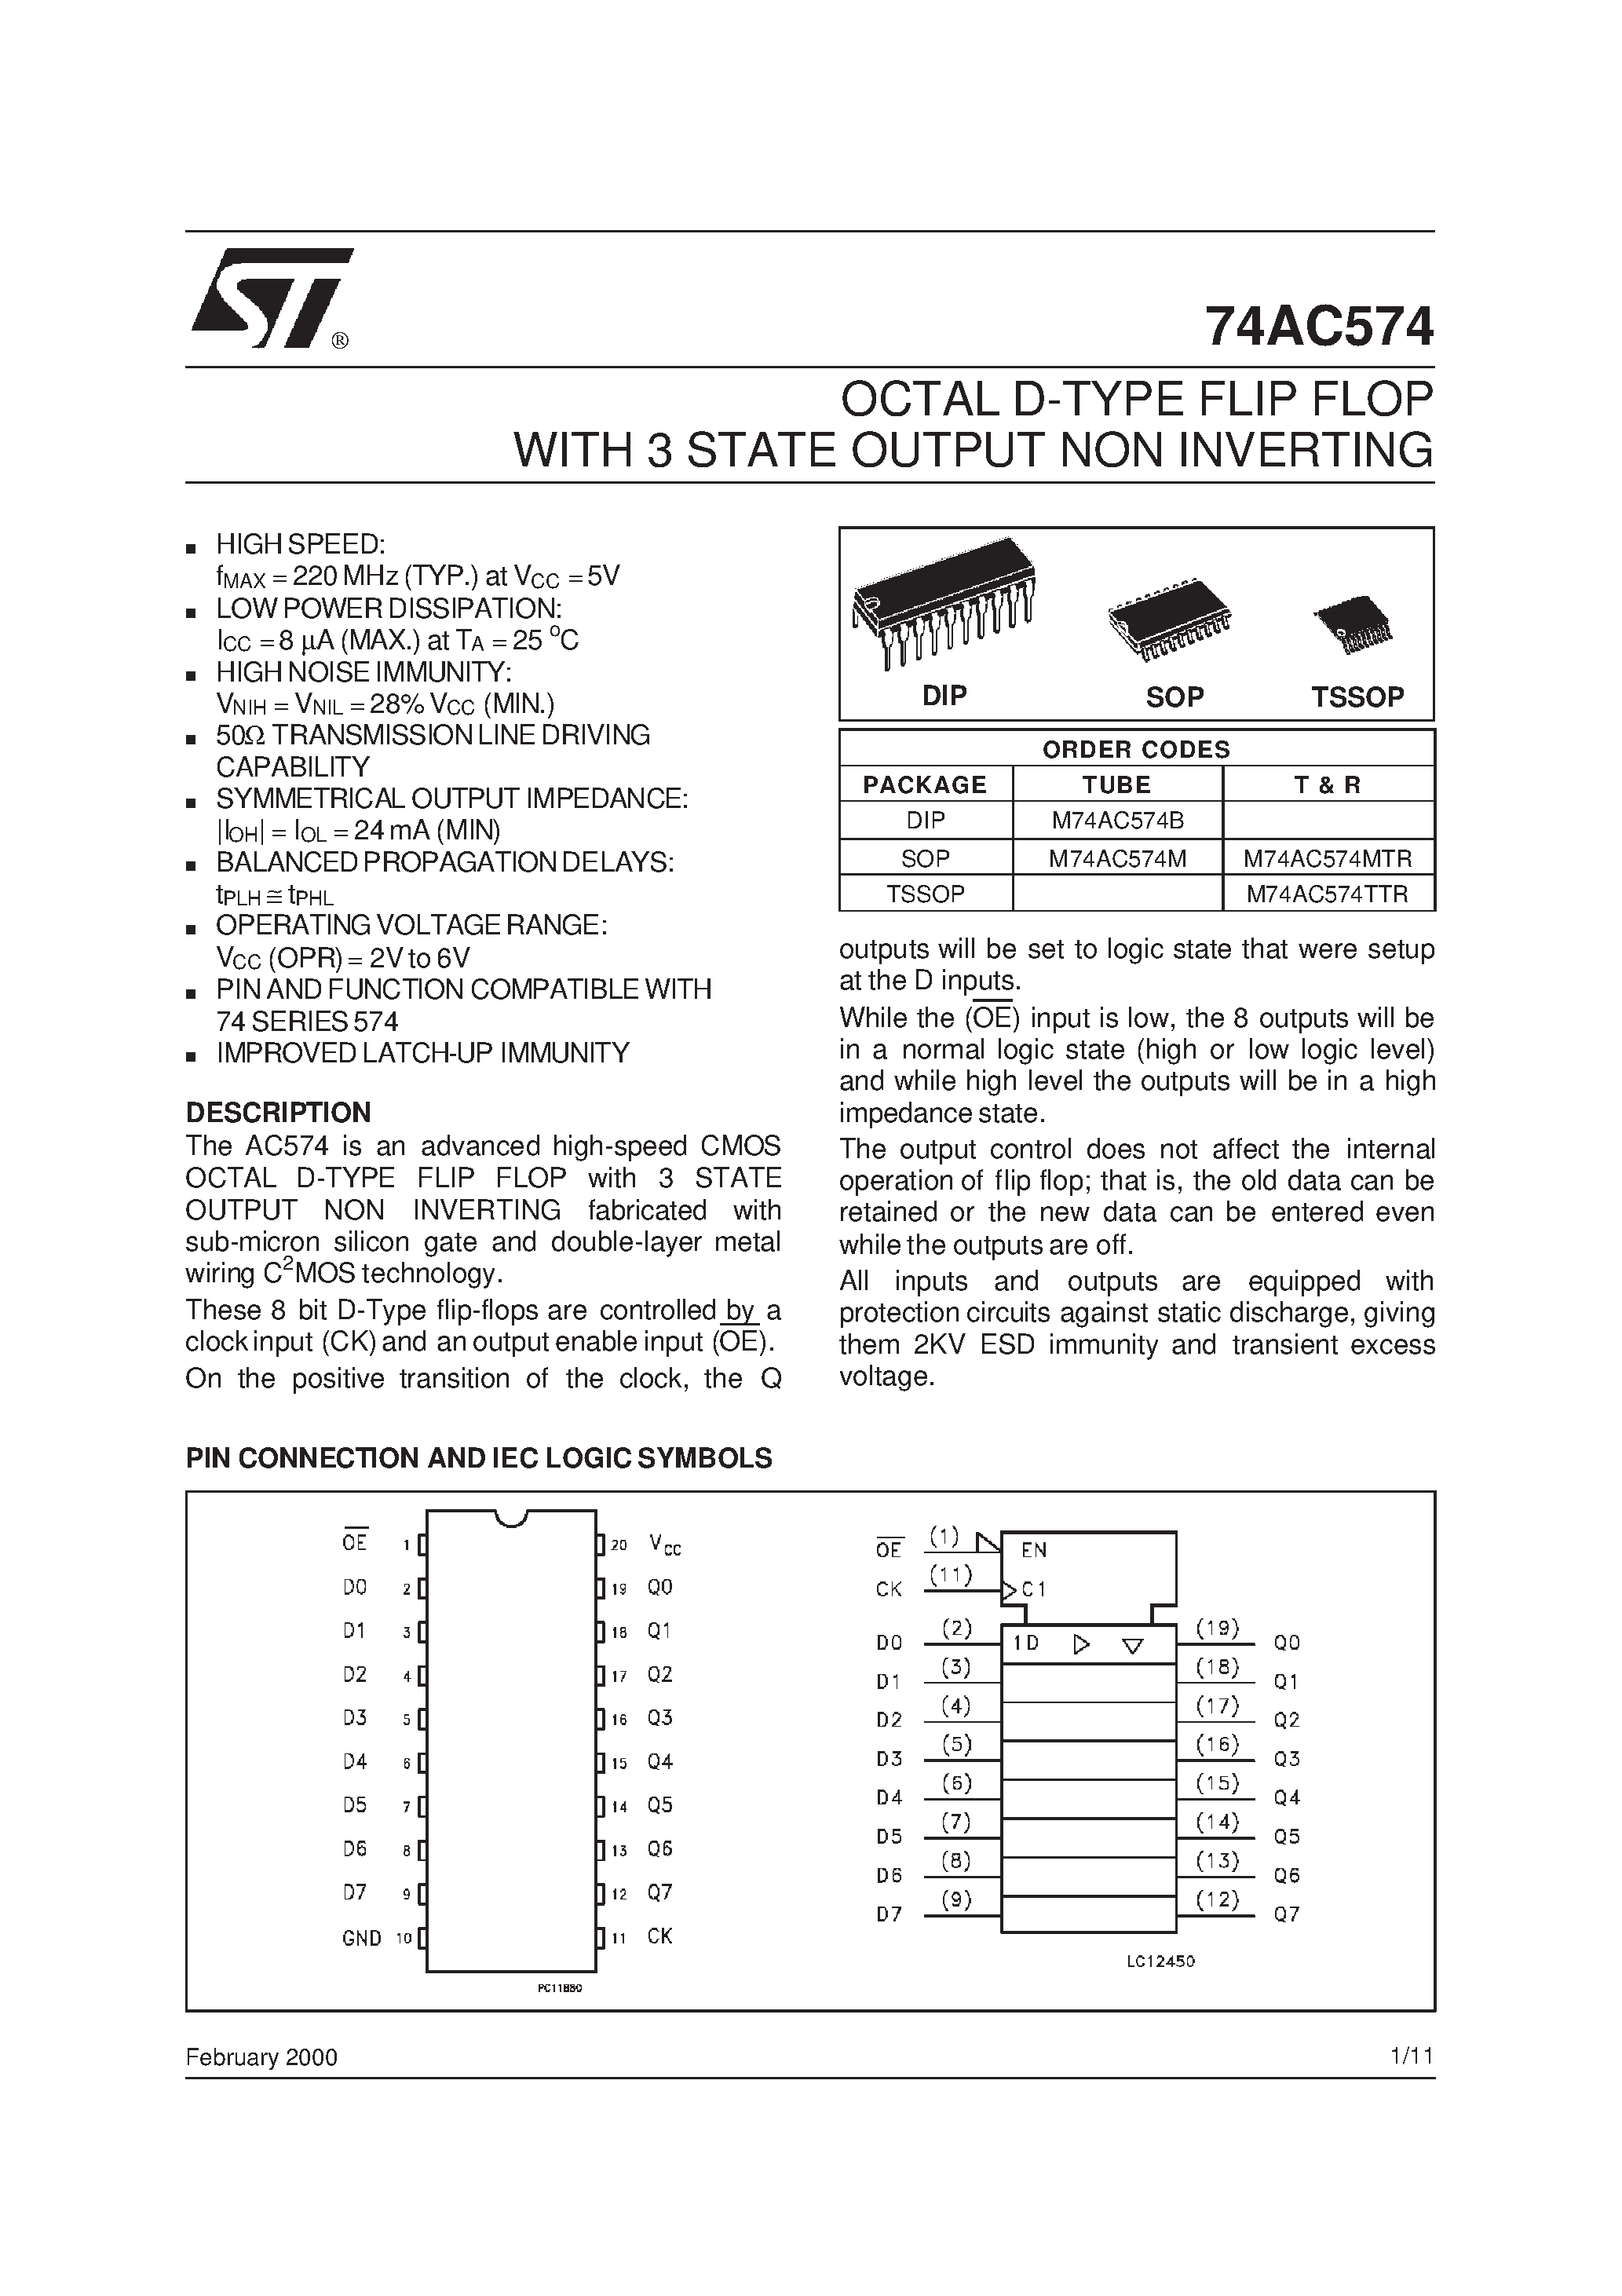 Datasheet M74AC574TTR - OCTAL D-TYPE FLIP FLOP WITH 3 STATE OUTPUT NON INVERTING page 1